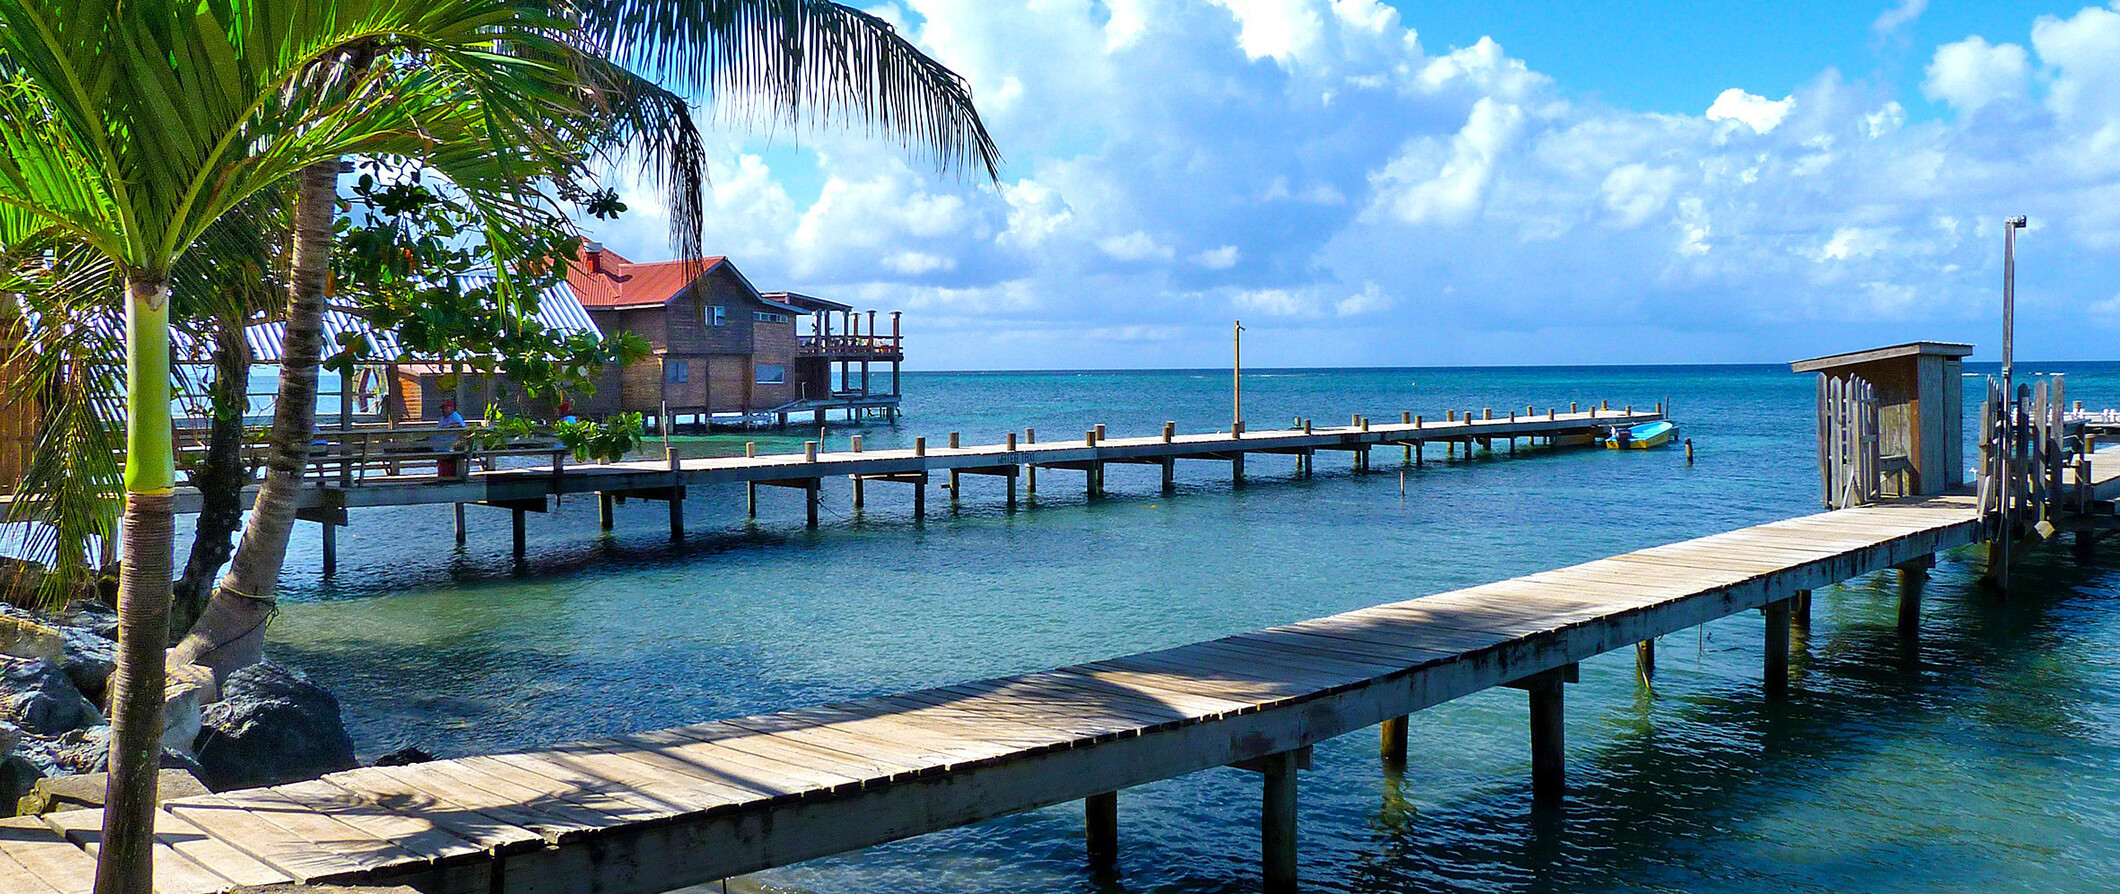 a dock in Honduras on the sea front